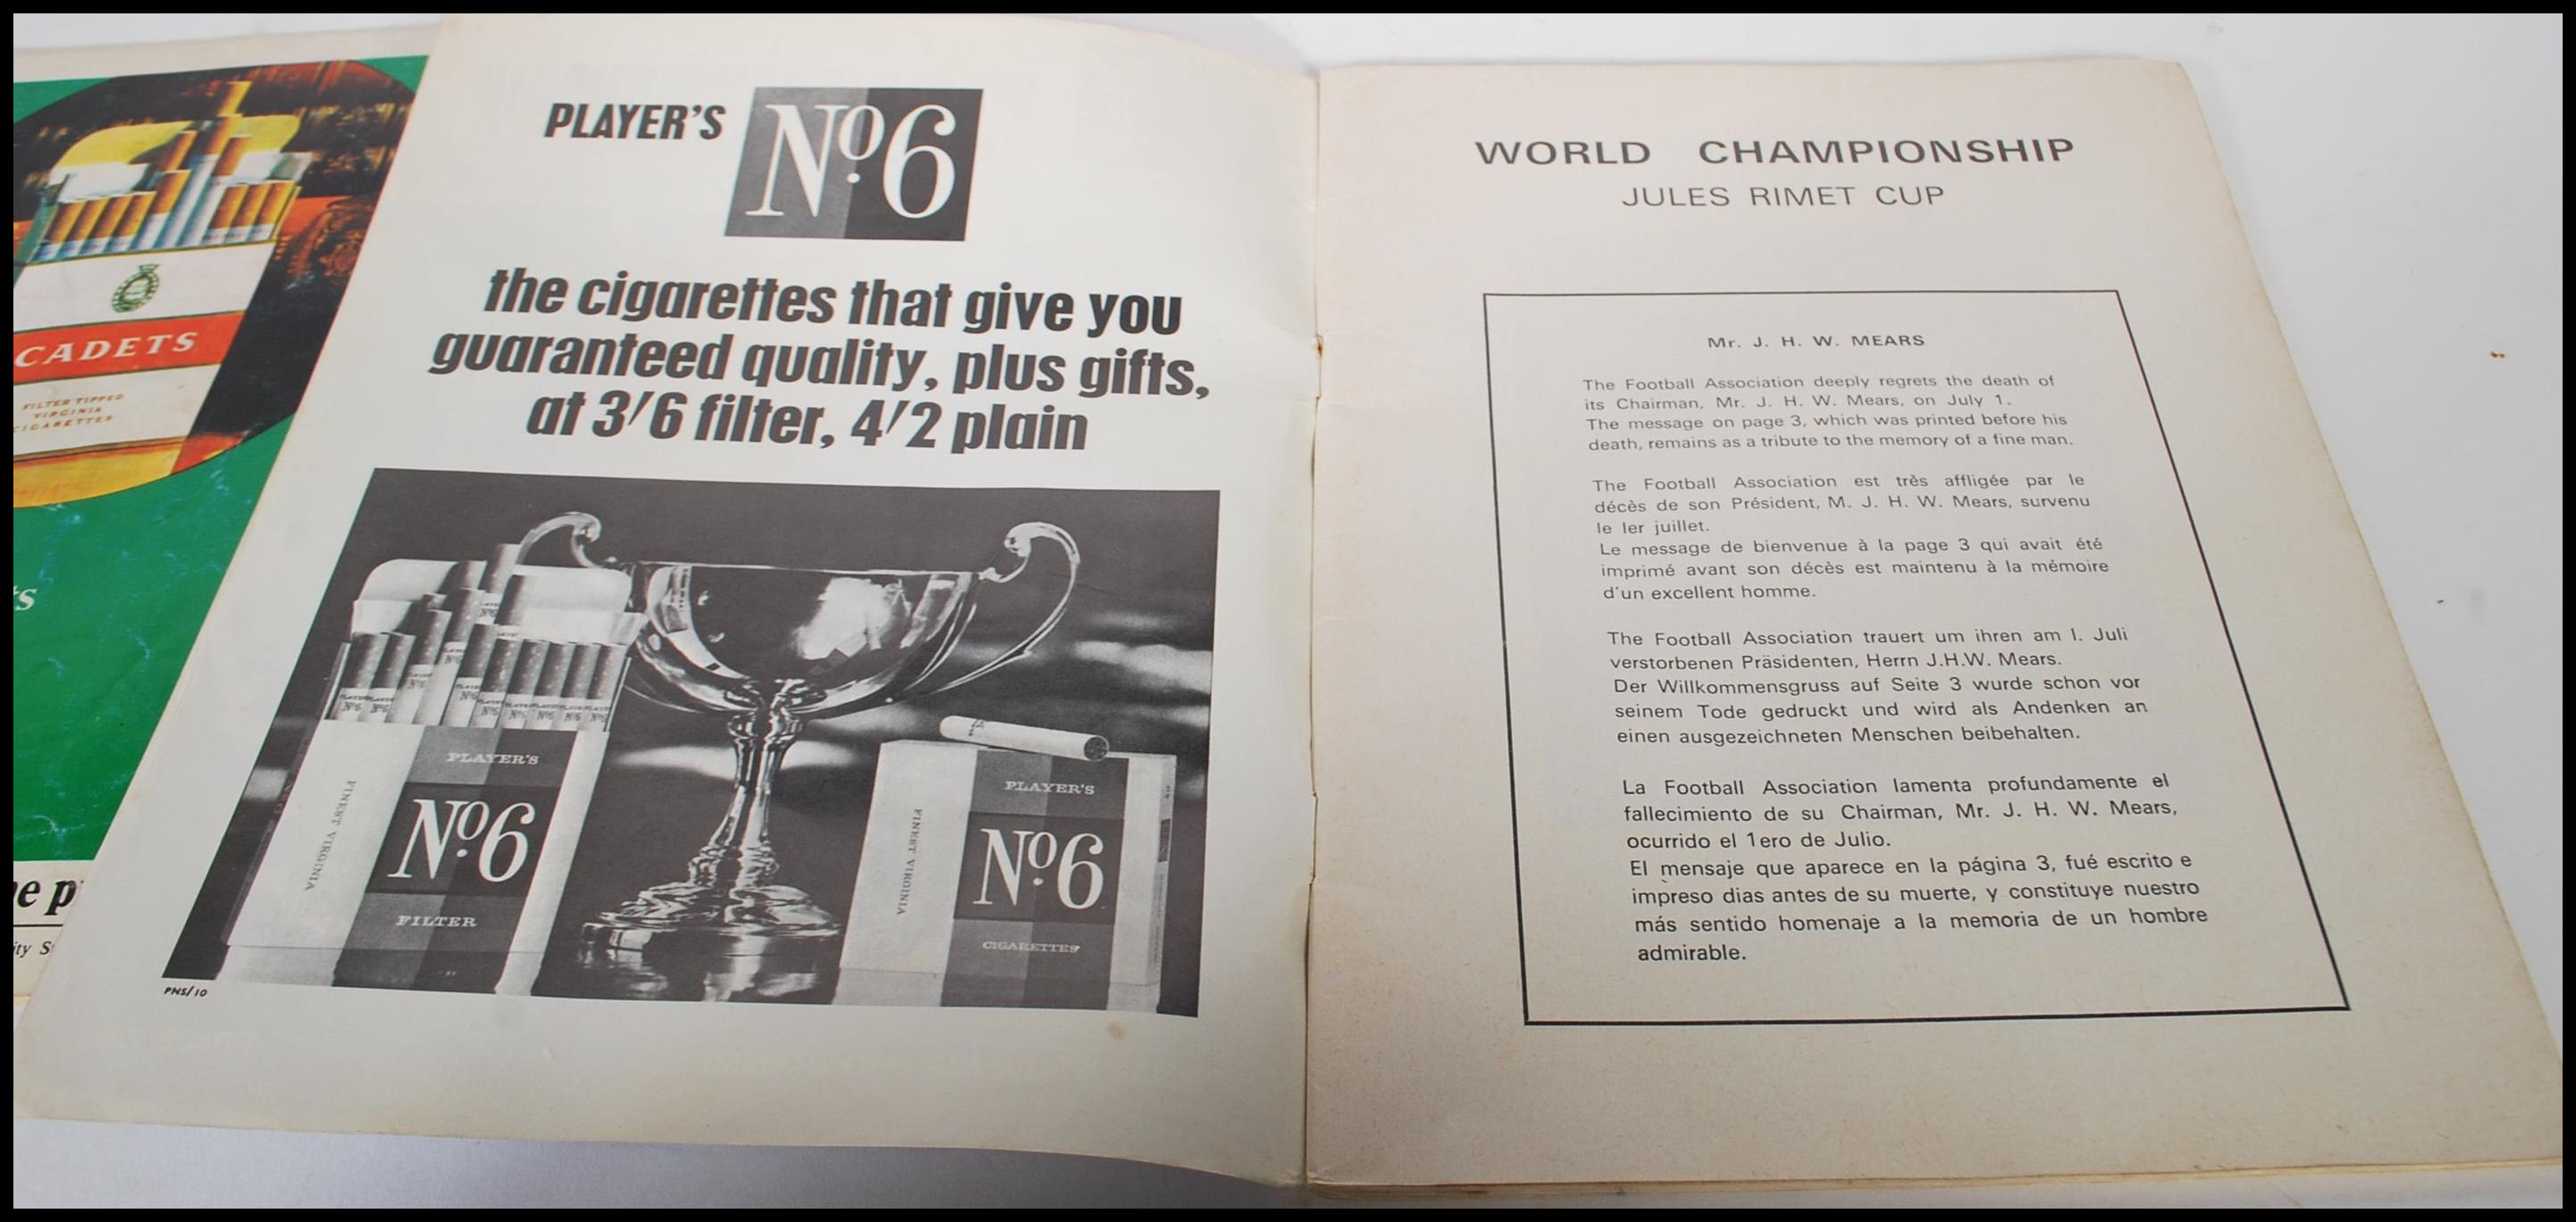 A 1966 World Championship Jules Rimet Cup football - Image 3 of 8